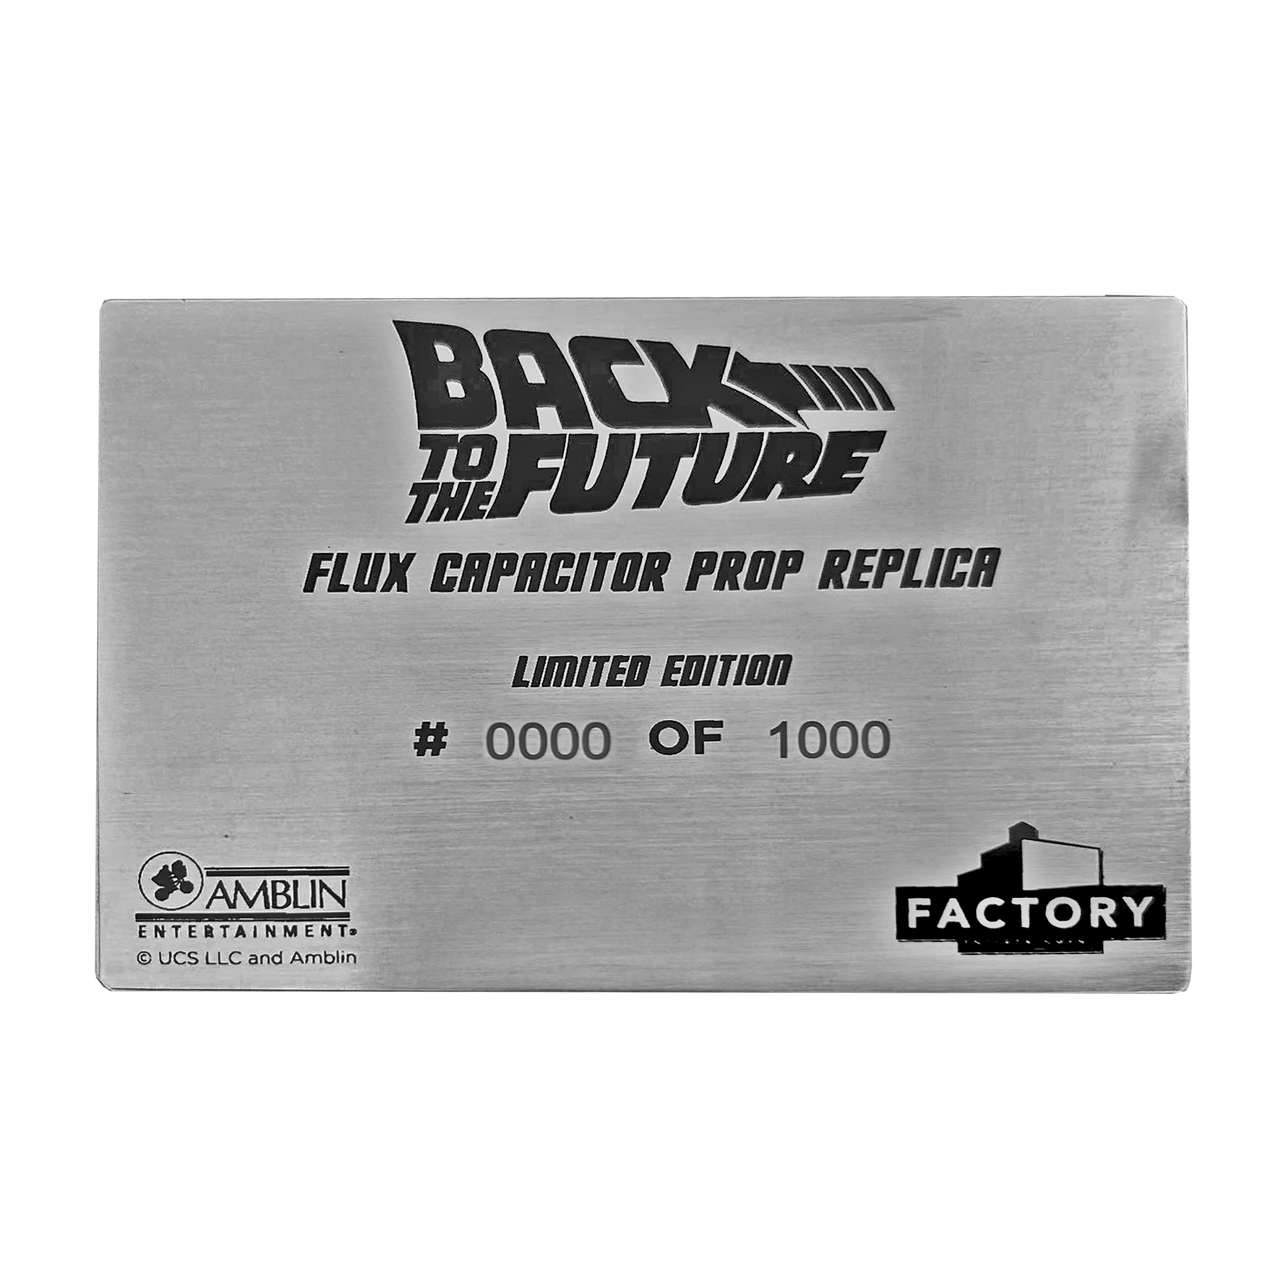 Factory Entertainment Flux Capacitor 1:1 Scale Prop Replica Back To The Future 408787 6